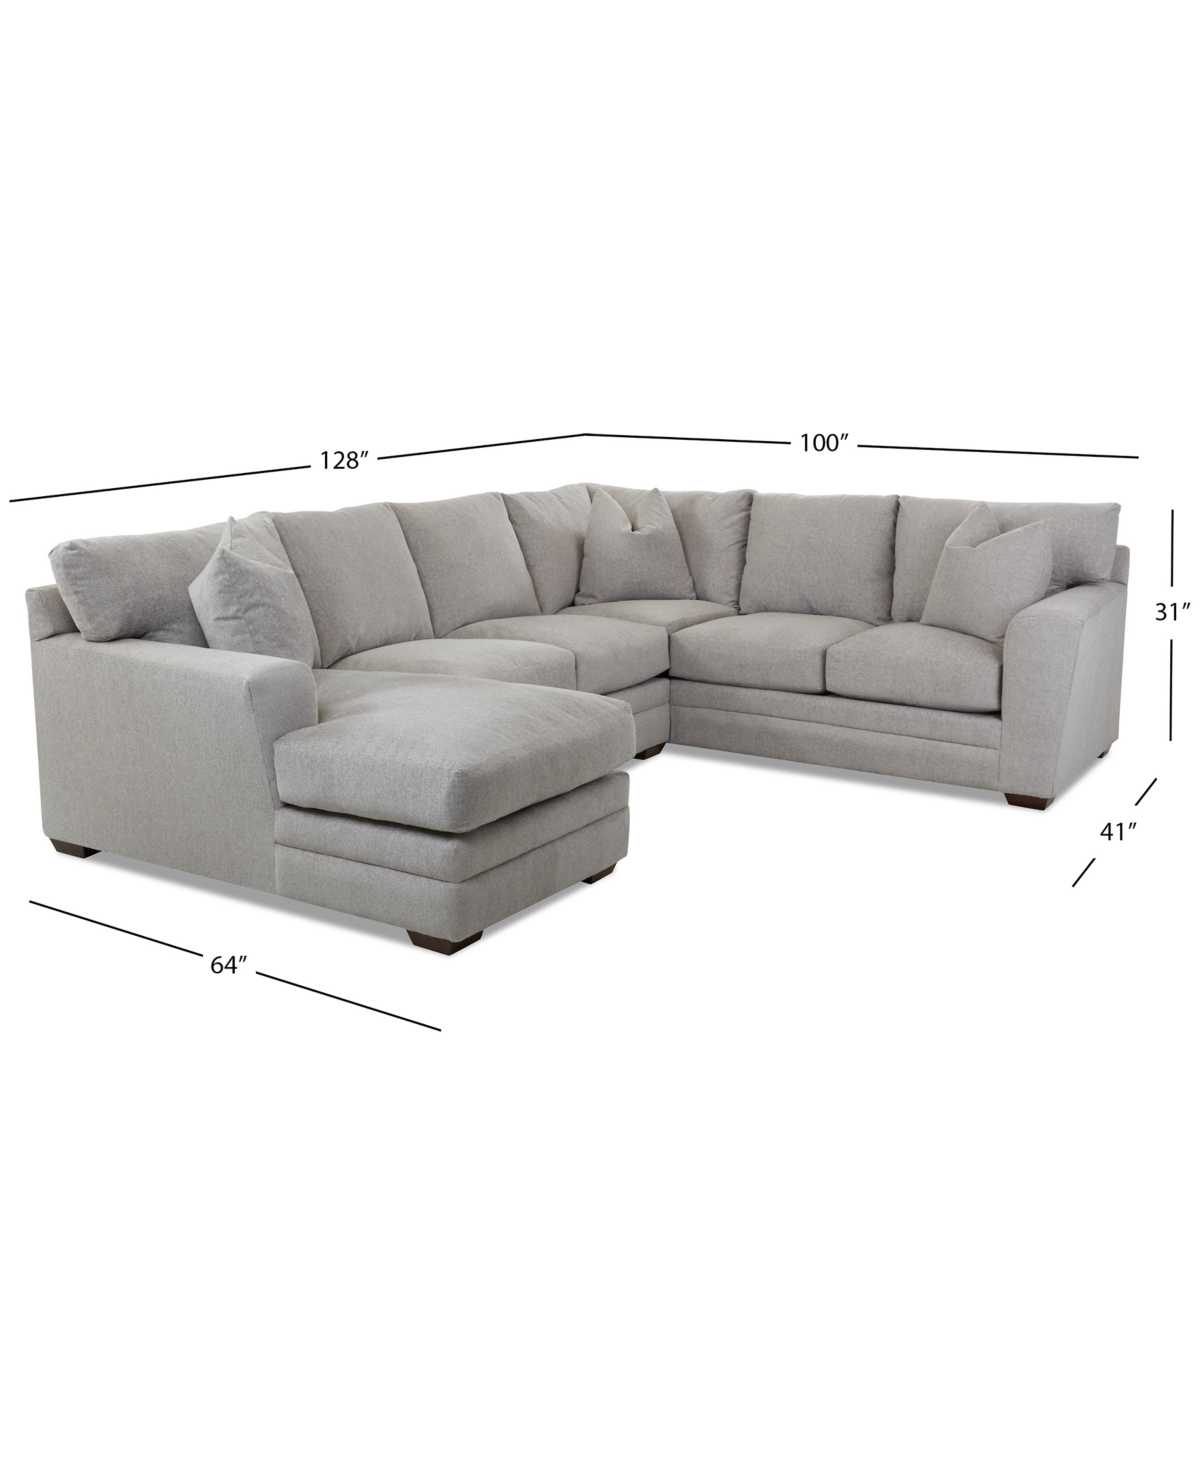 Closeout! Loranna 3-Pc. Fabric Sectional with Chaise, Created for Macy's - Grey